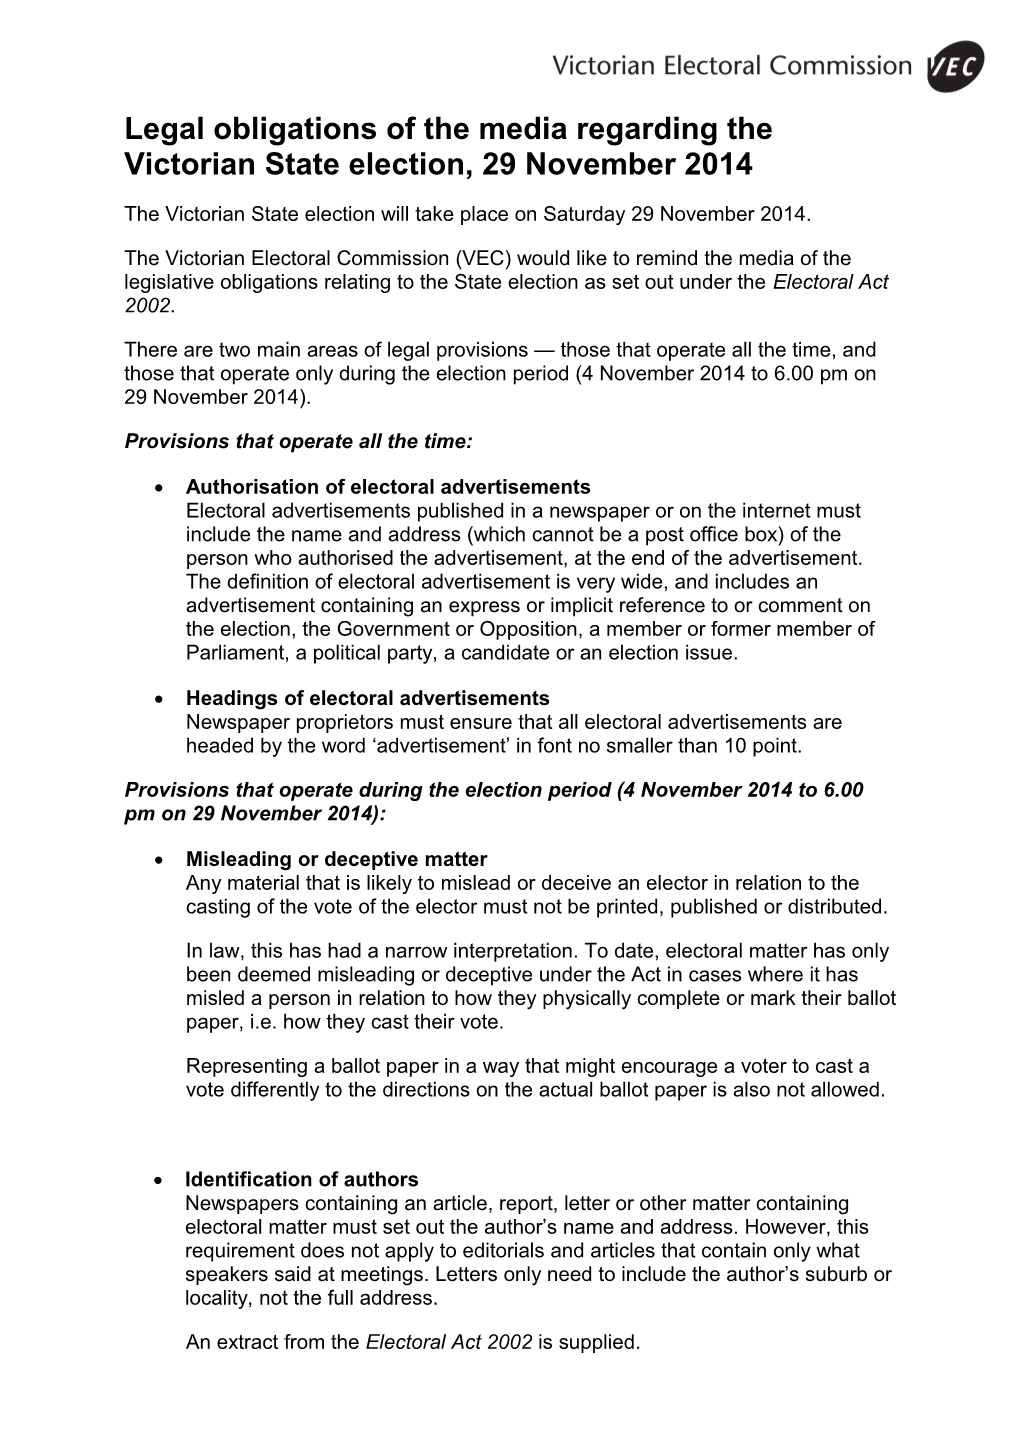 Legal Obligations of the Media Regarding the Victorian State Election, 29 November 2014